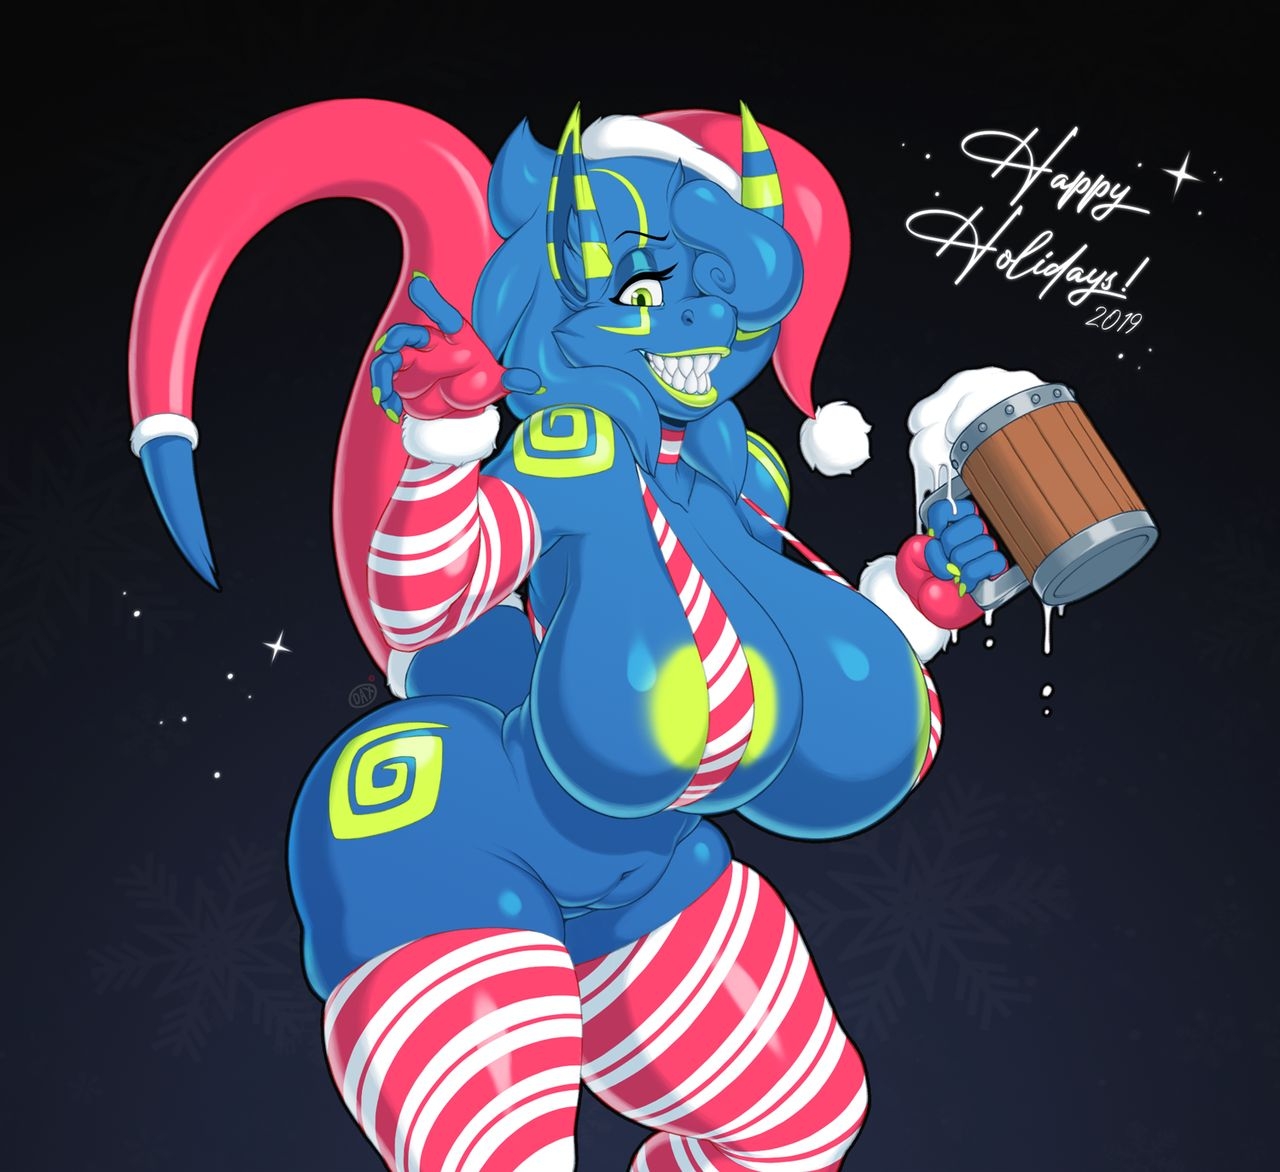 Furry Holiday ladies and New Year babes 161